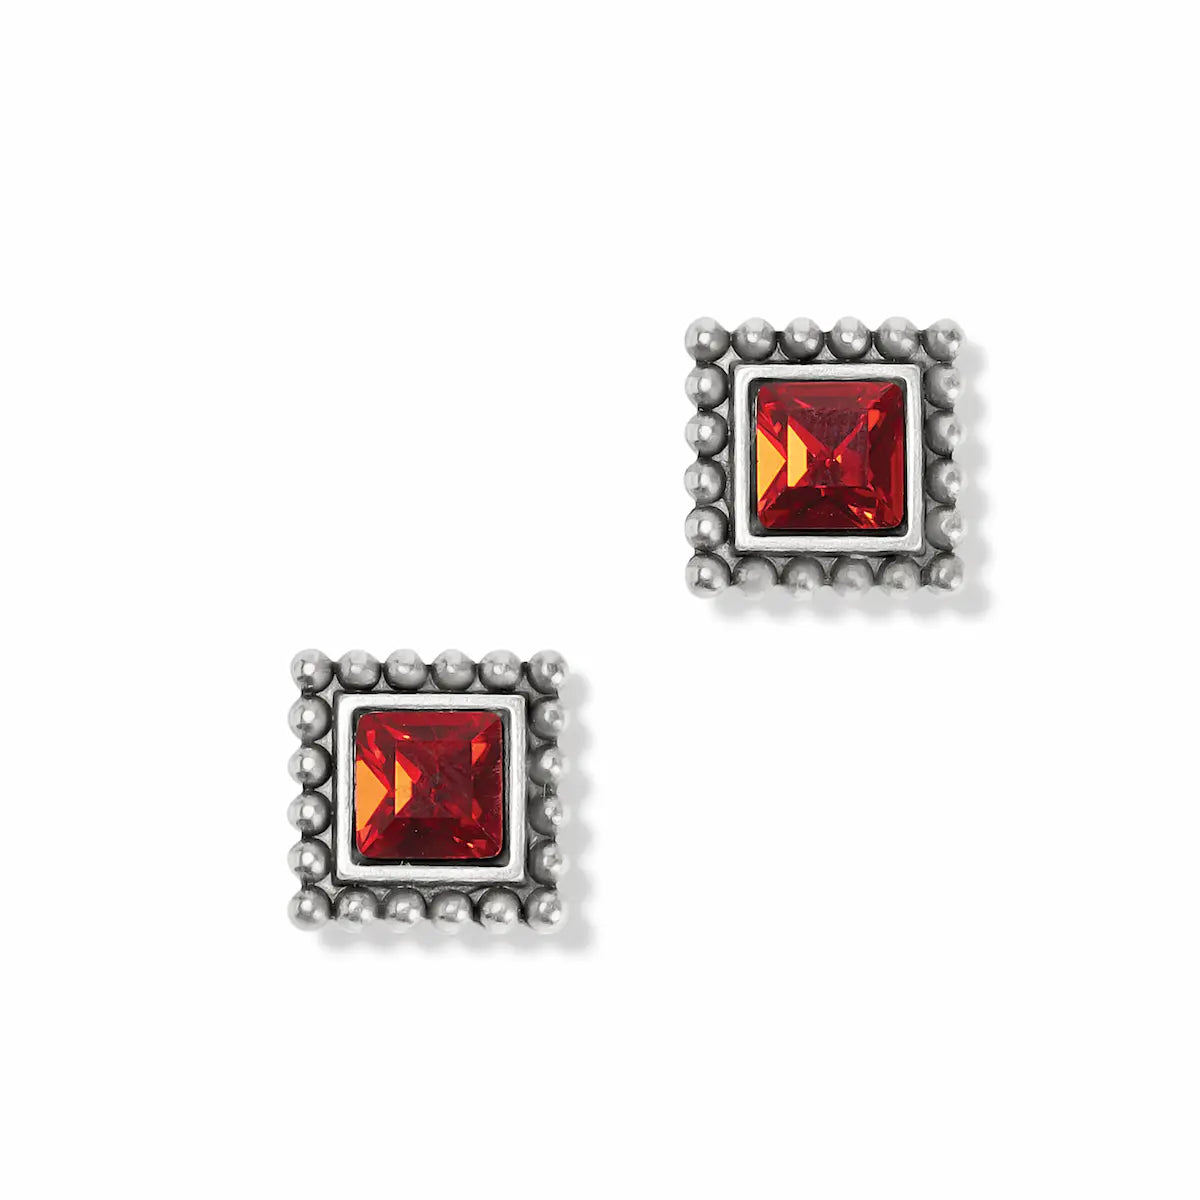 Sparkle Square Red Mini Post Earrings